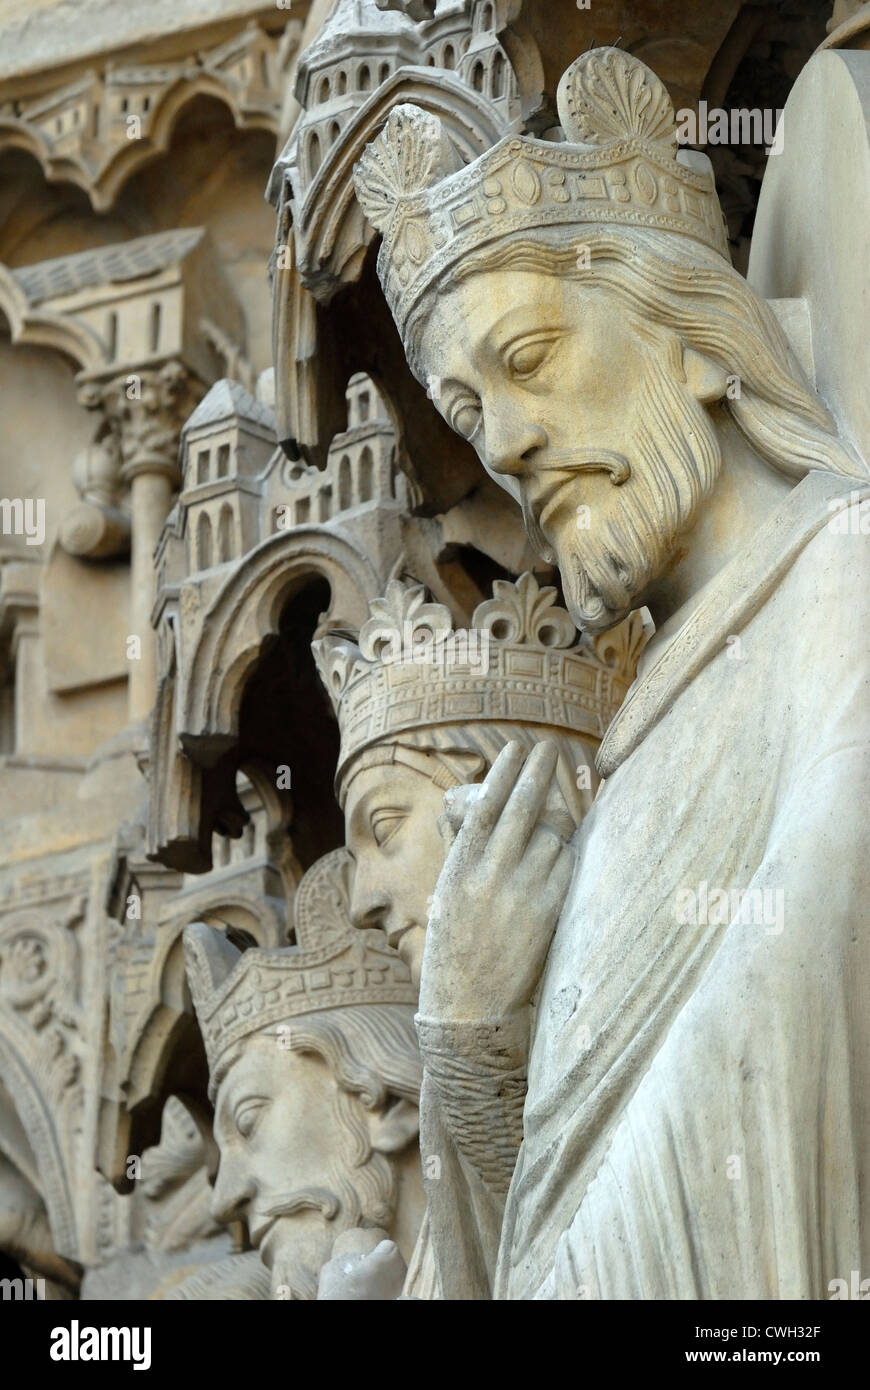 Paris, France. Notre Dame cathedral - statues by the entrance Stock Photo